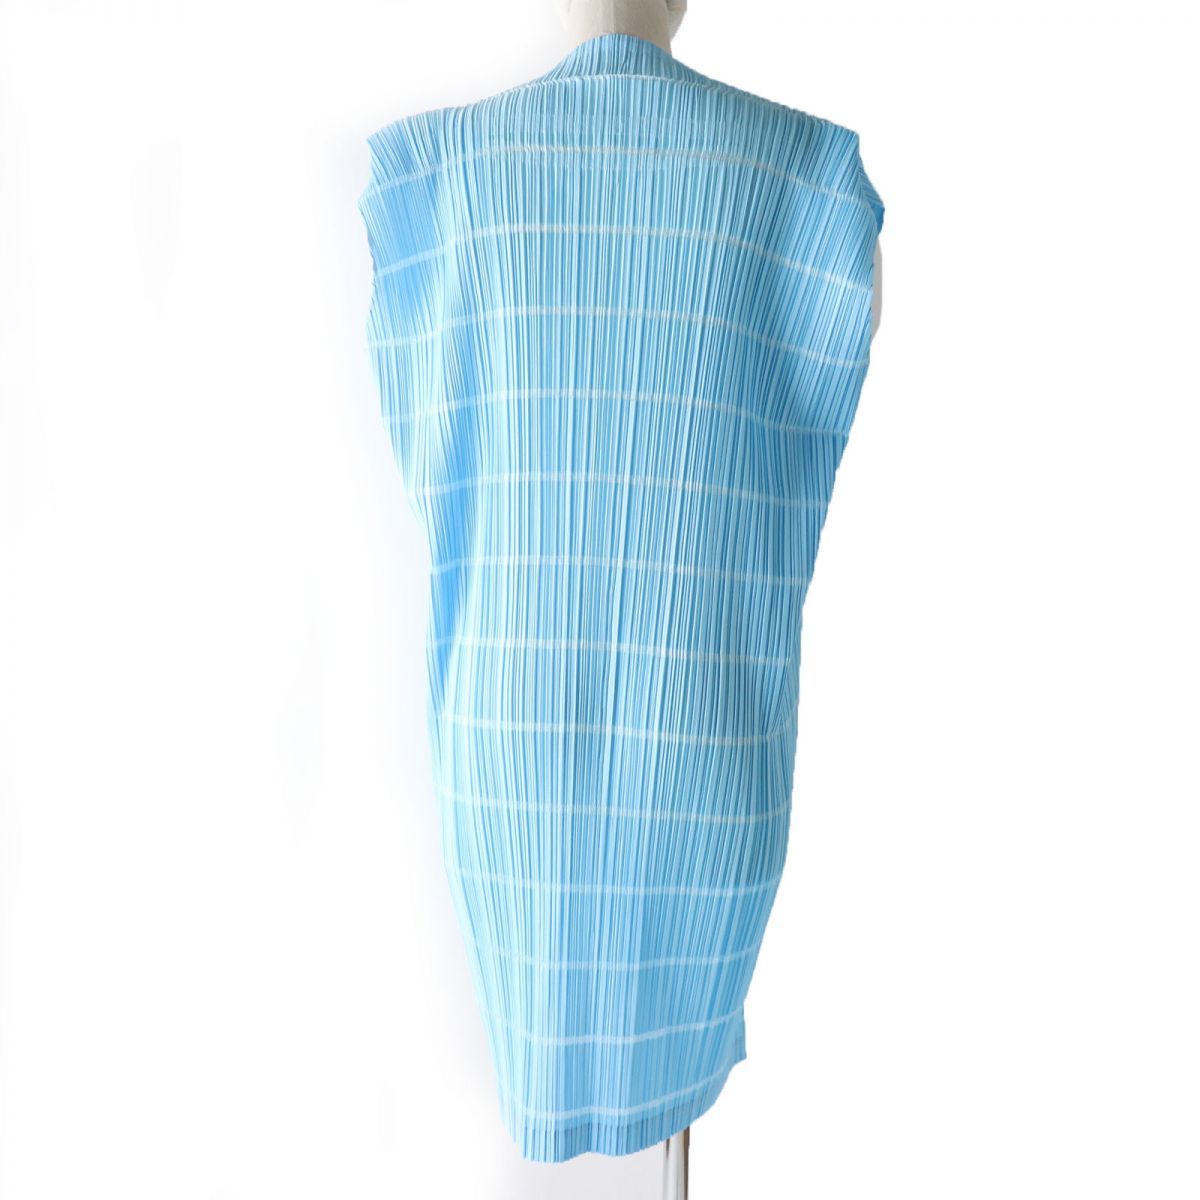  ultimate beautiful goods * regular goods PLEATS PLEASE pleat pulley z Issey Miyake 17SS PP71-JH585 boat neck One-piece light blue 2 made in Japan 